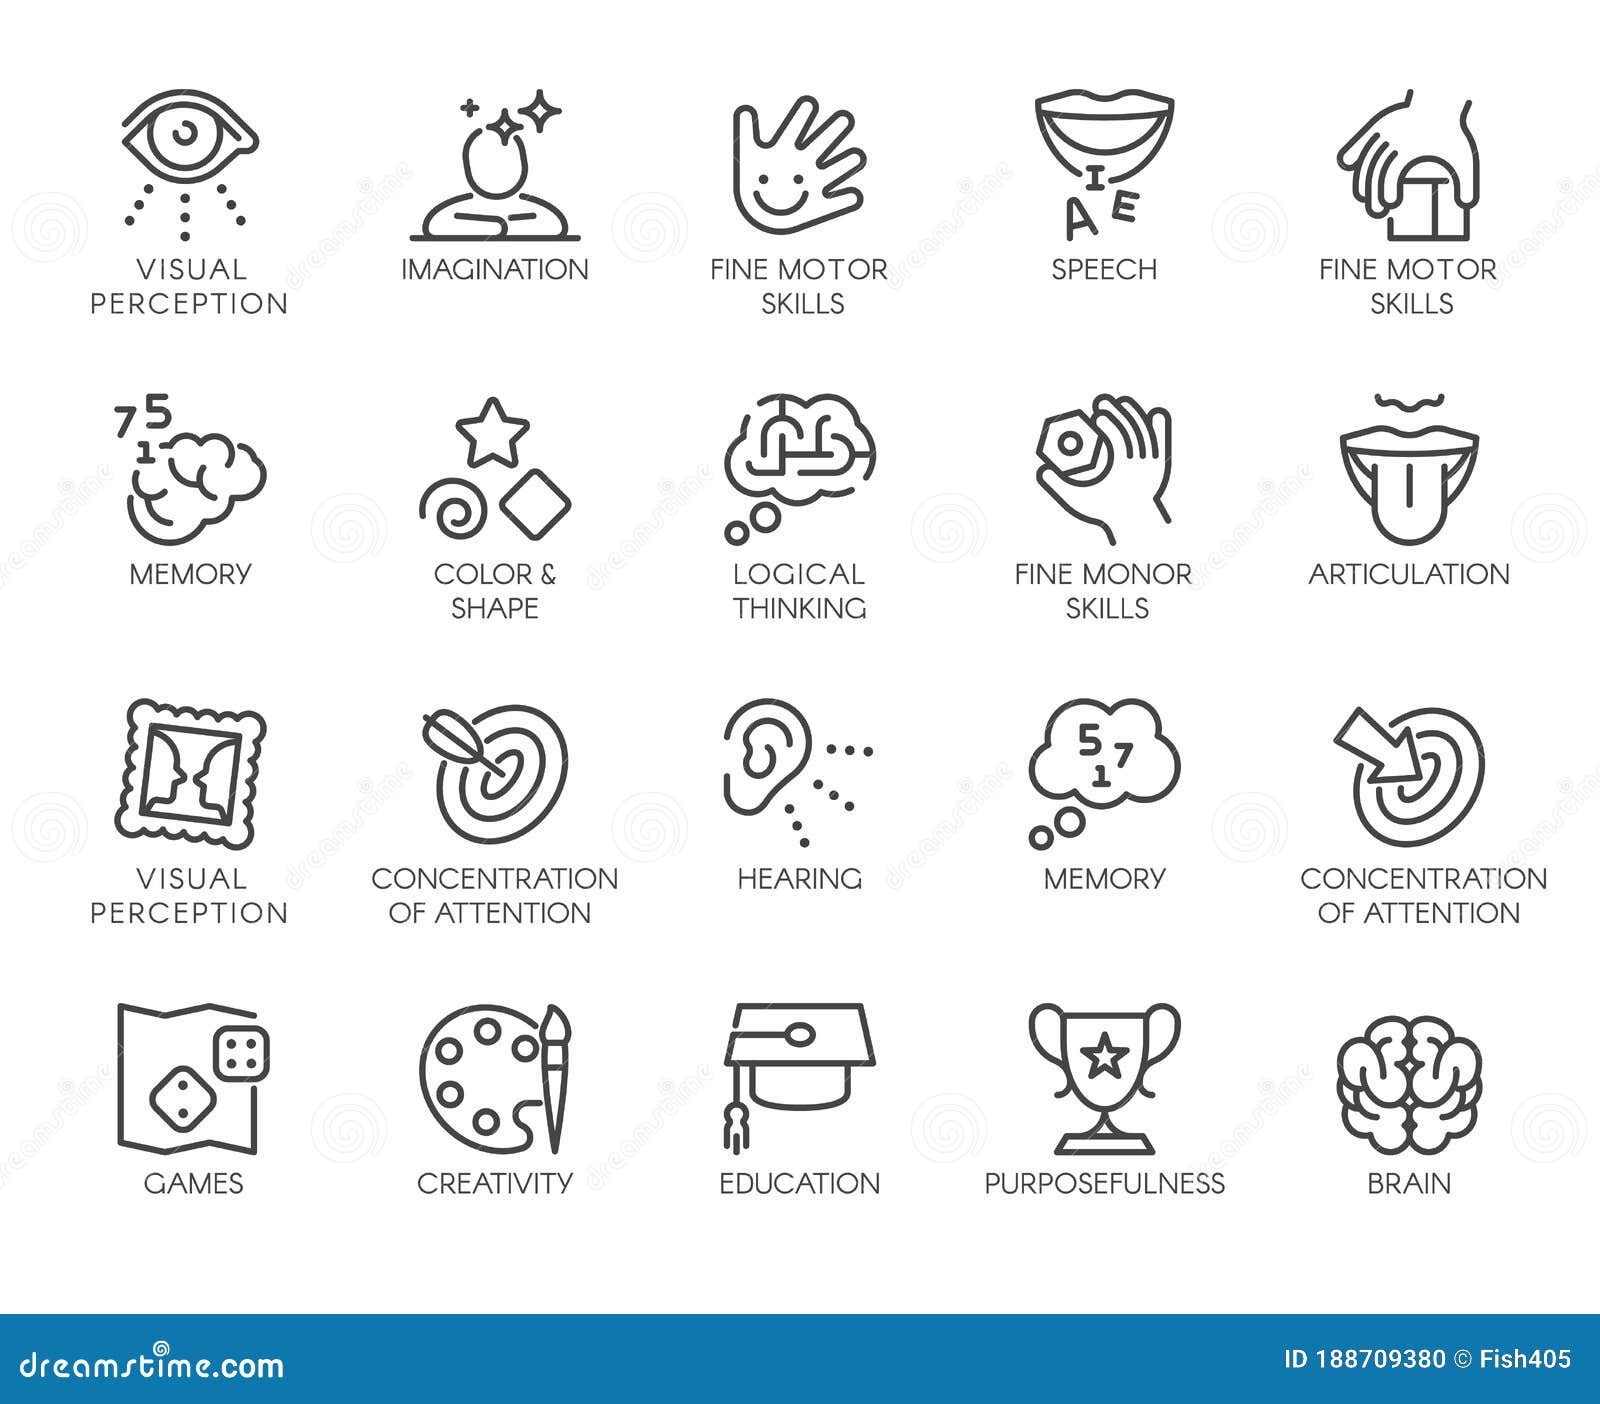 premium icons pack on human cognitive abilities and preschool development of children. such line signs as fine motor